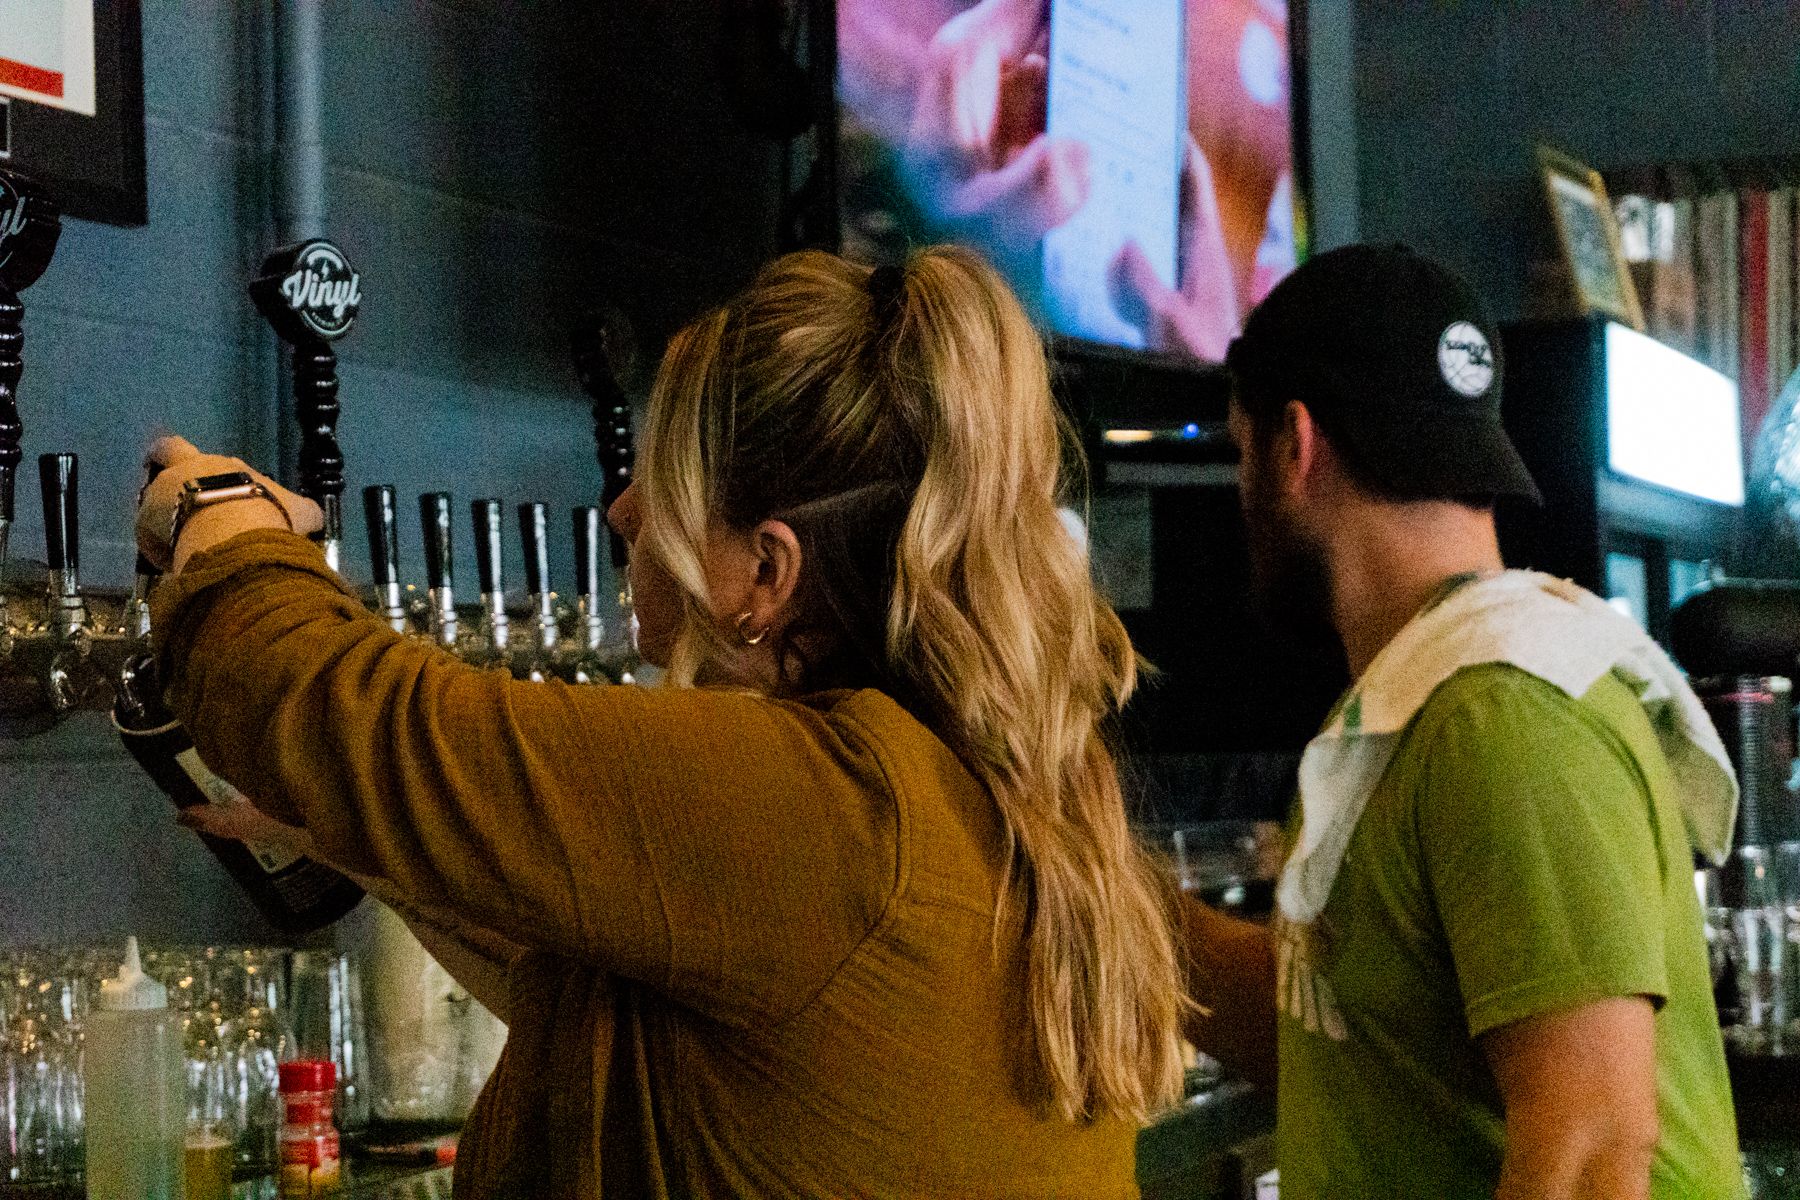 Kylene and Nick serving customers during Vinyl Brewing's VinylMania event in 2021